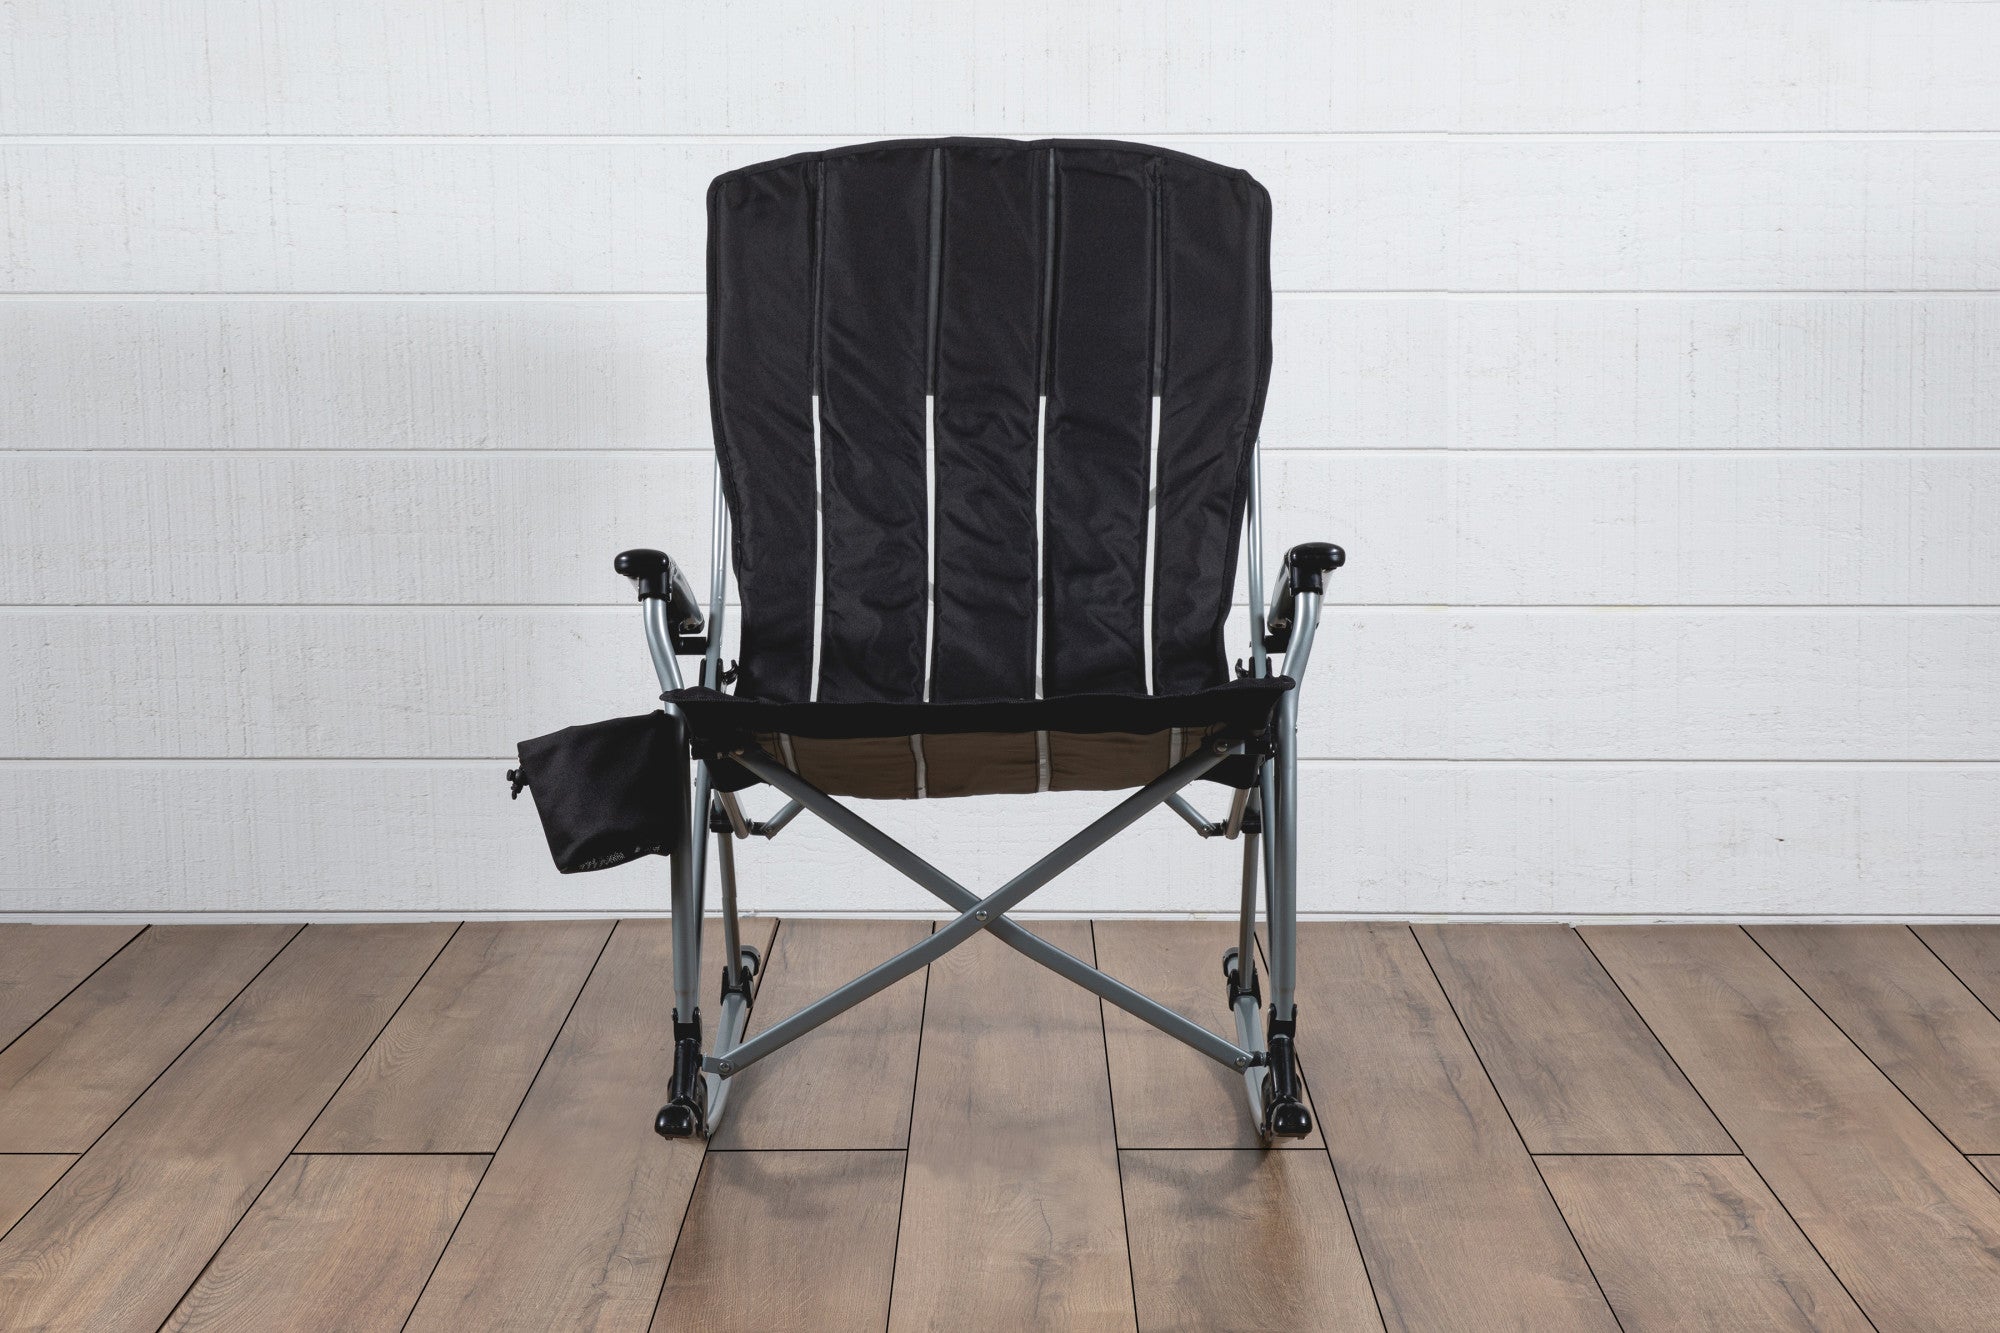 New York Jets - Outdoor Rocking Camp Chair